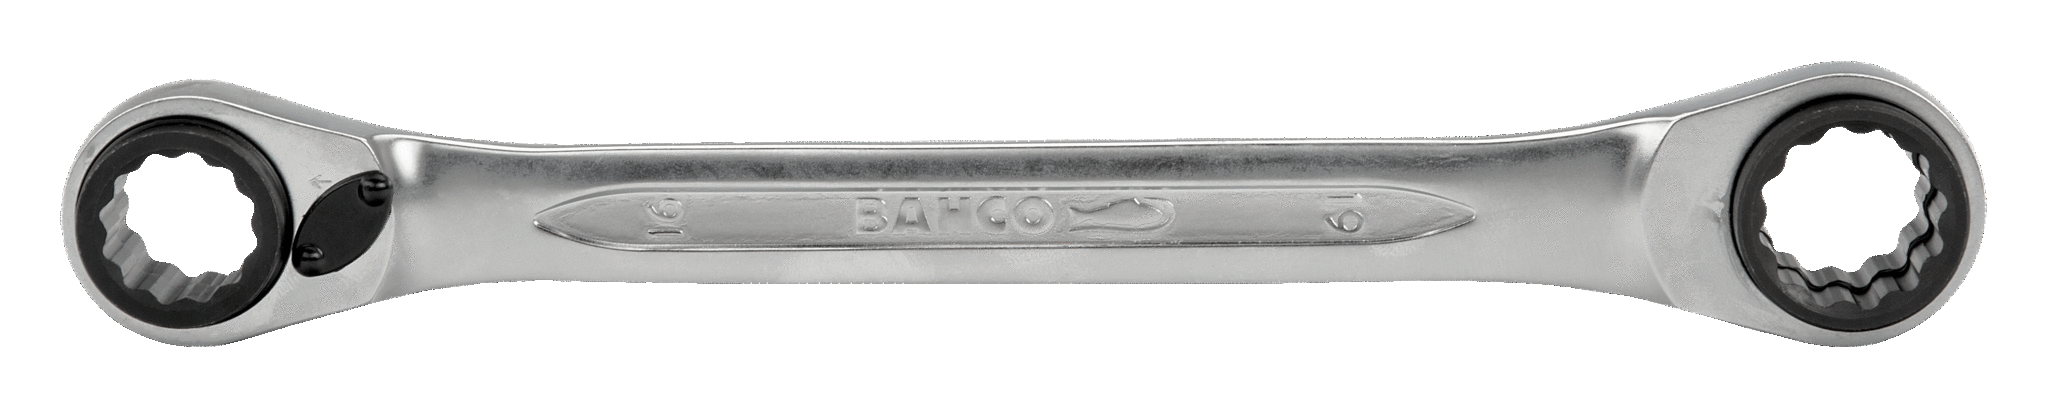 4-in-1 Ratcheting Ring Wrenches with Chrome Finish - S4RM-8-11 by Bahco